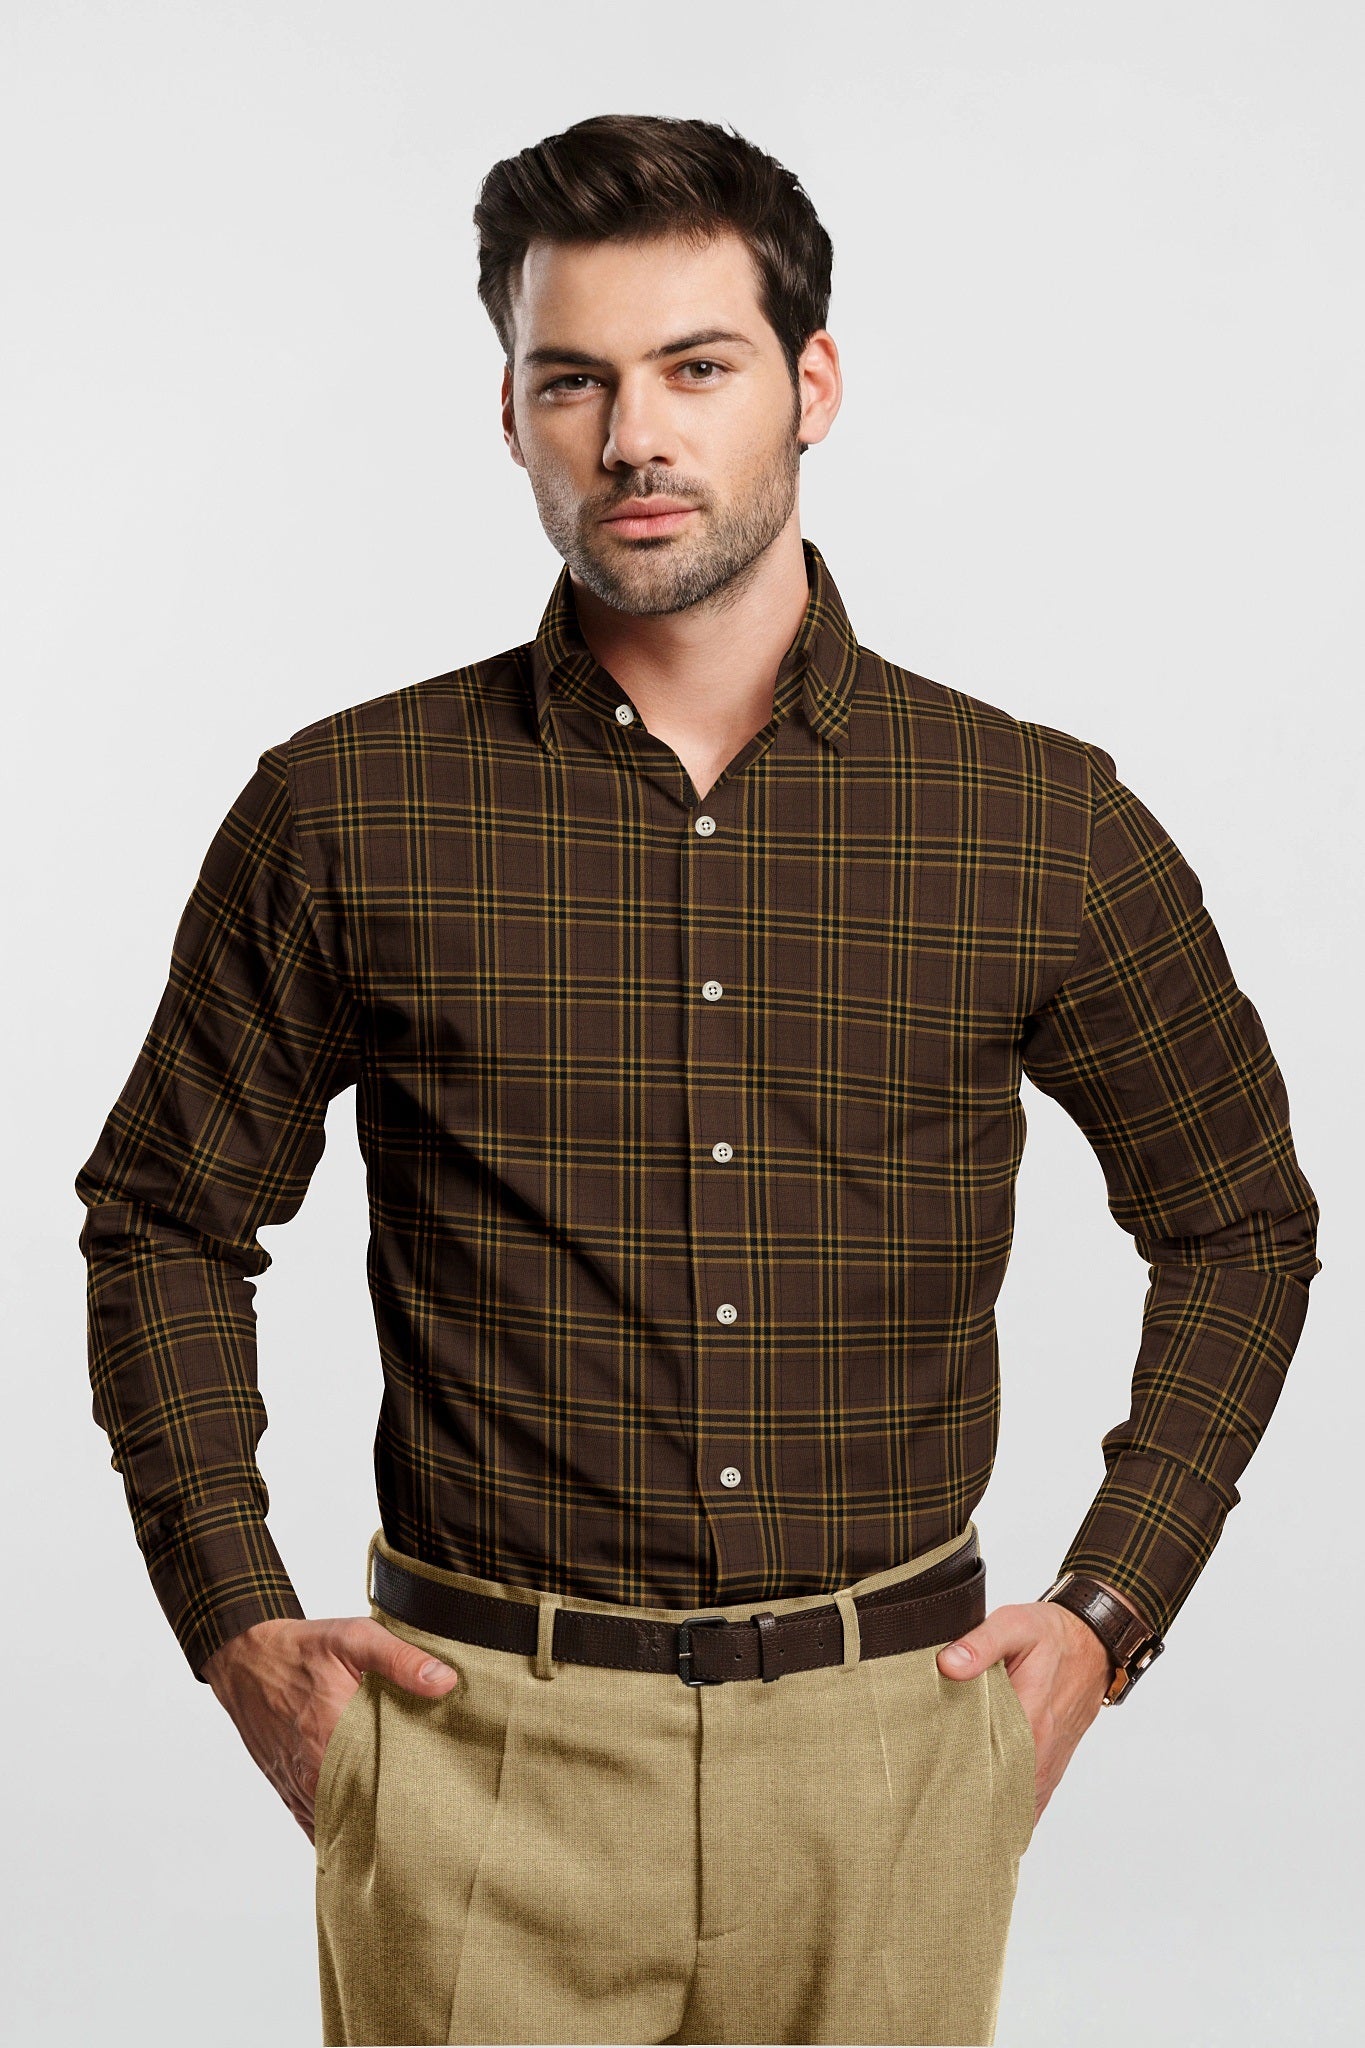 Pecan Brown with Ochre Yellow and Black Checks Cotton Shirt